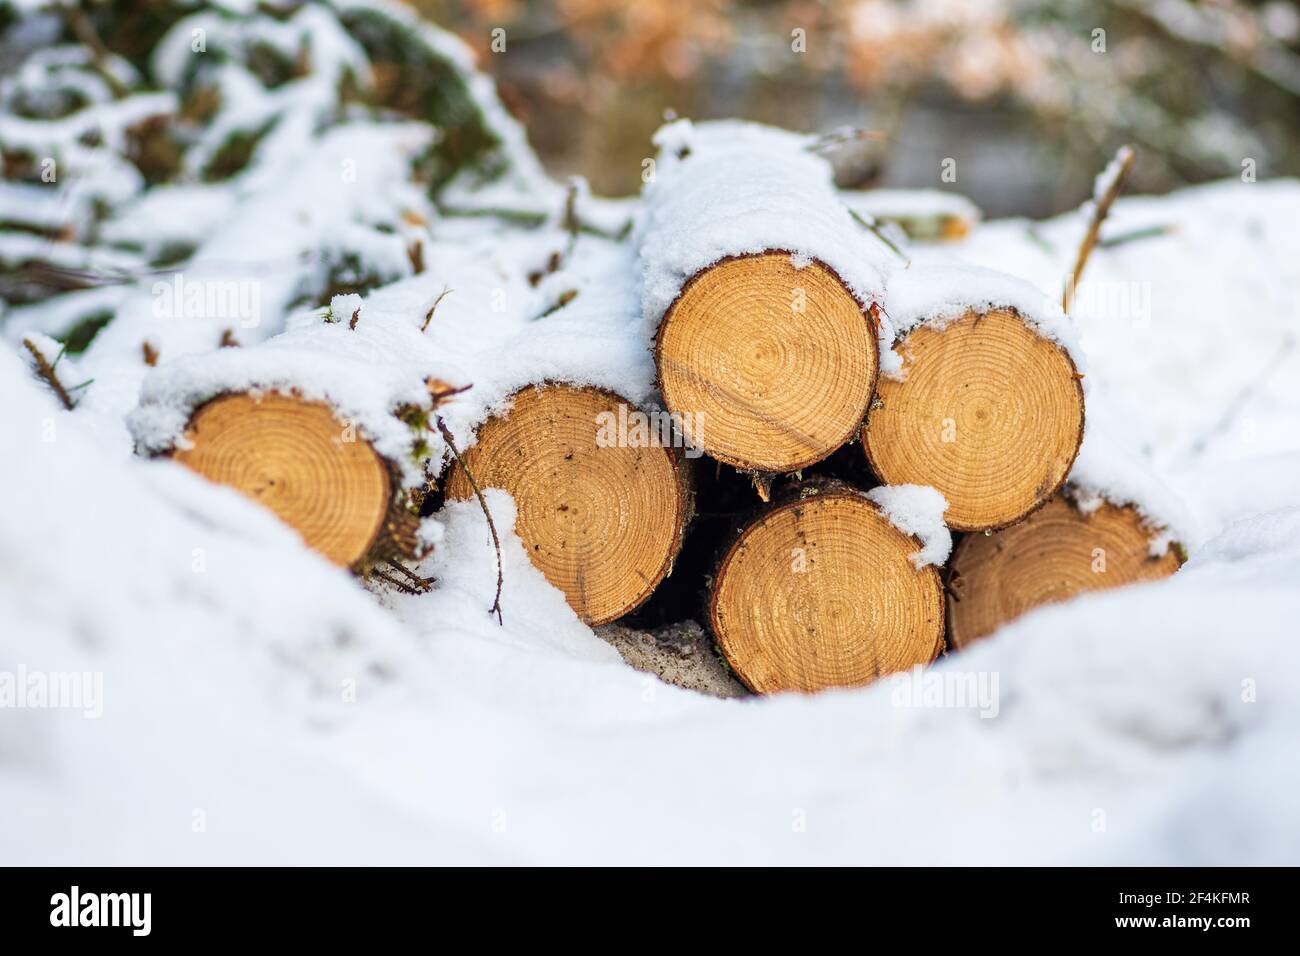 Stack composed of blocks, pieces or logs of wood in winter or spring covered by snow. Stacking wood for drying and storage, close up Stock Photo